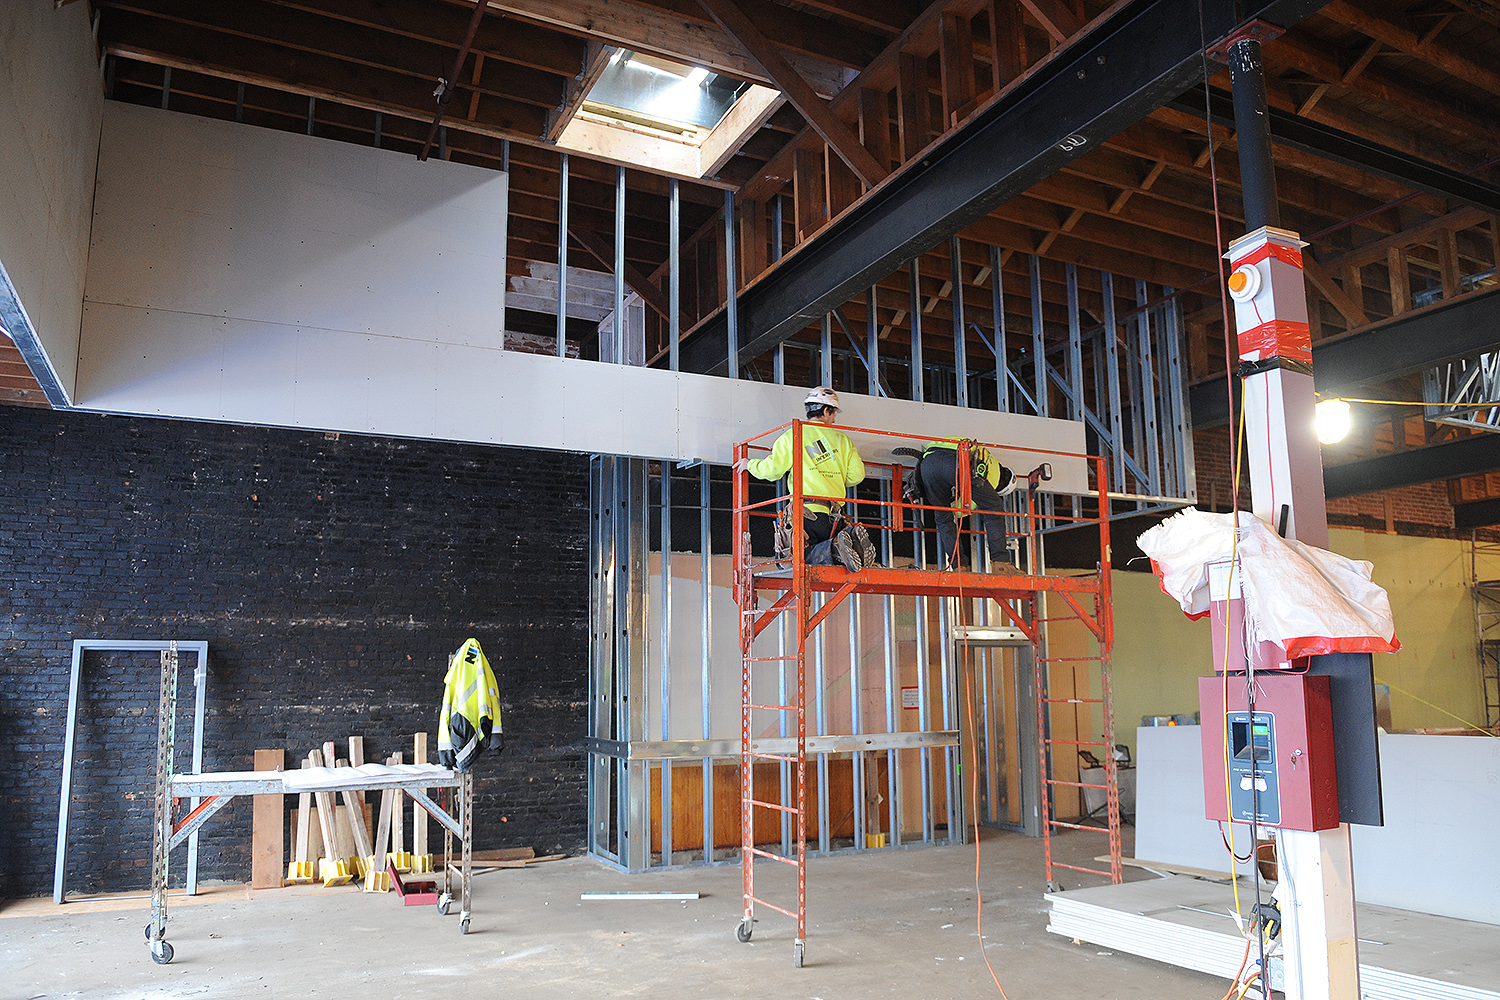 Crews drywalled the front section of the bookstore on March 7, 